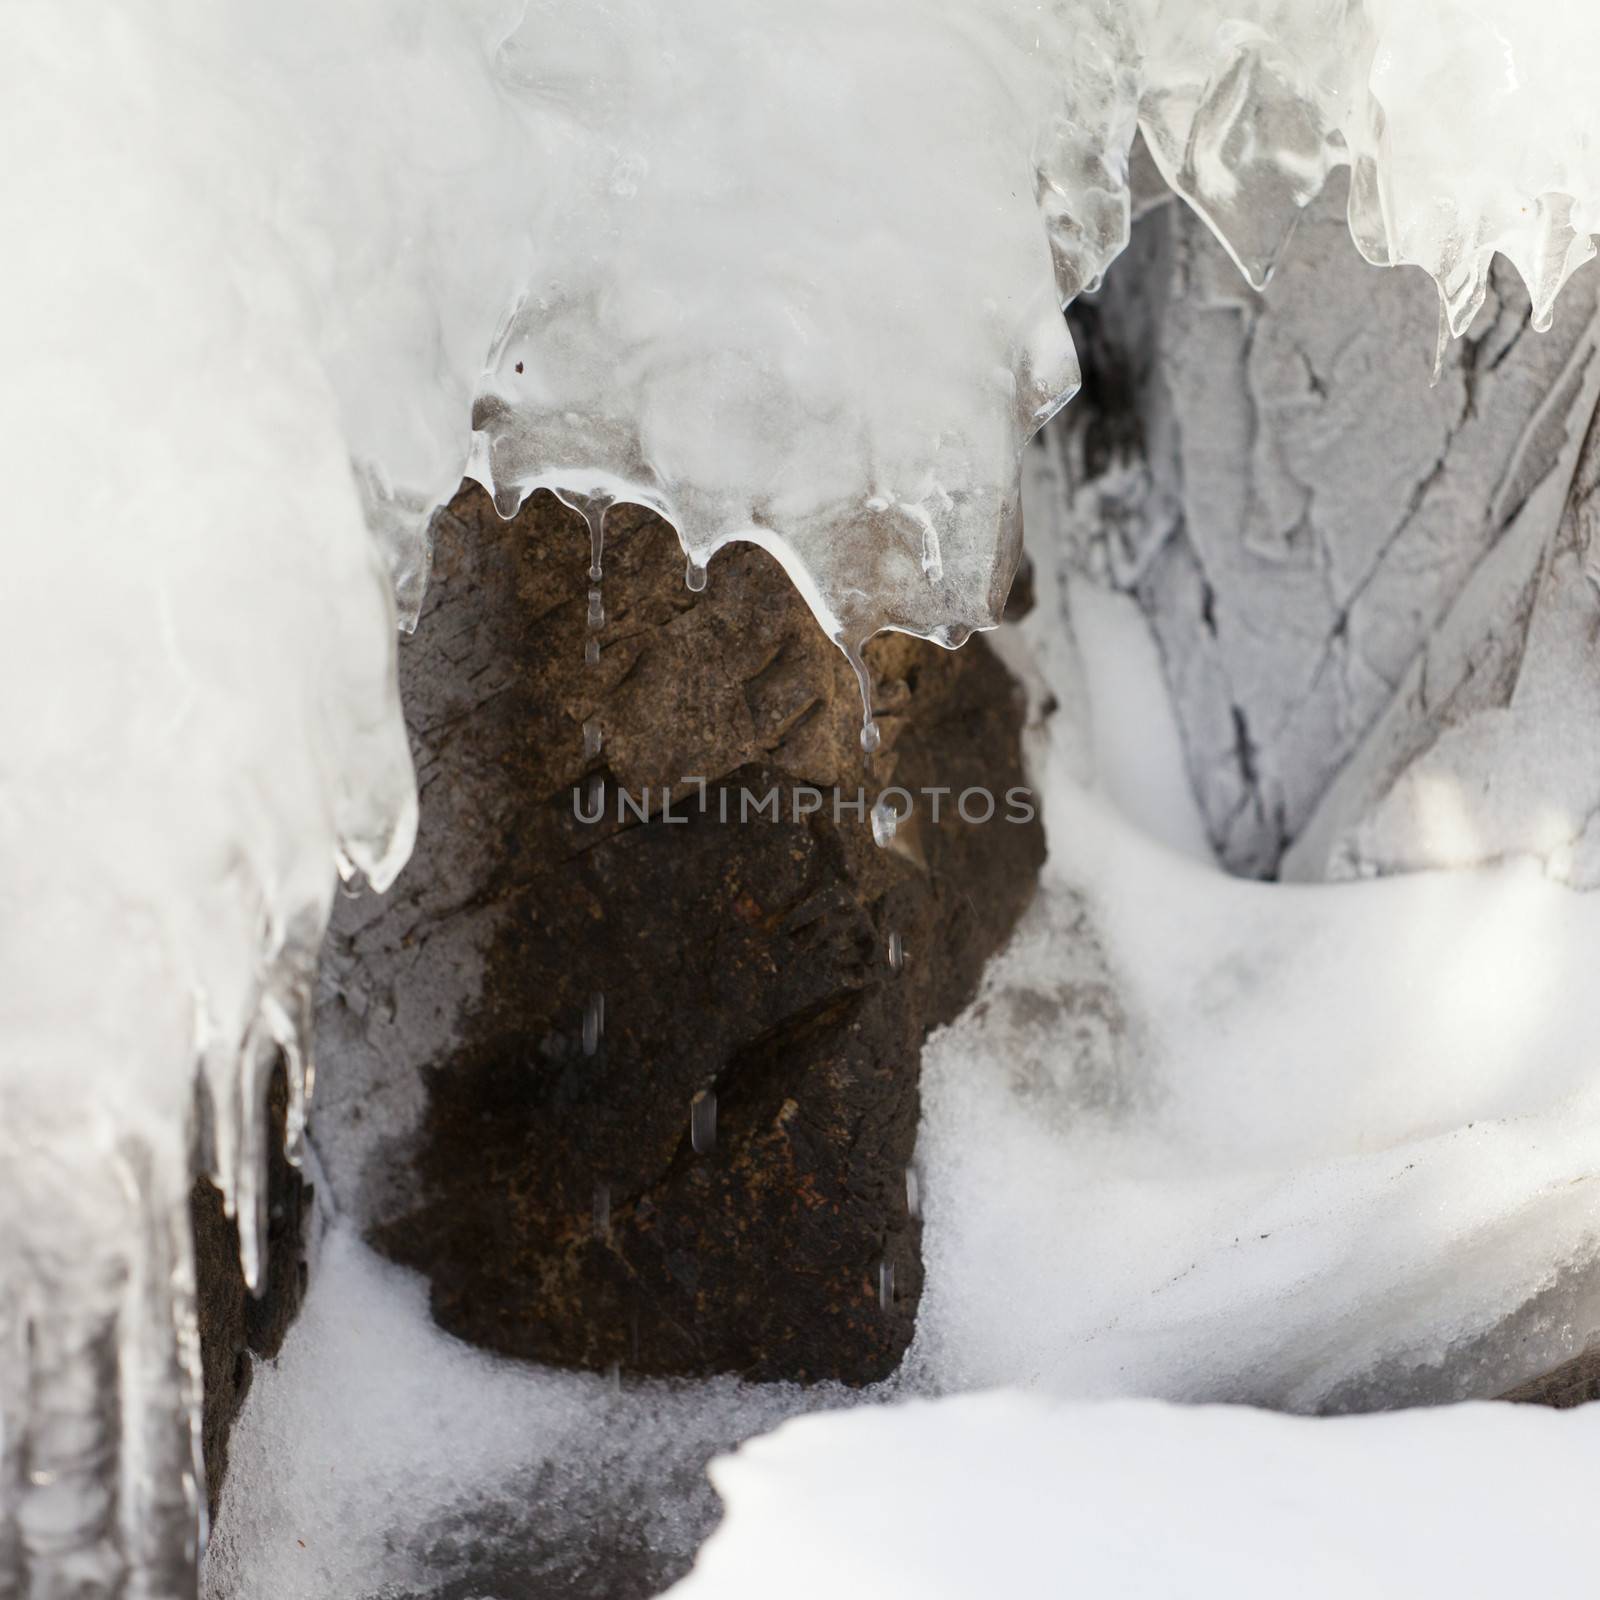 Snow and ice thawing on fractured weathered rock by PiLens